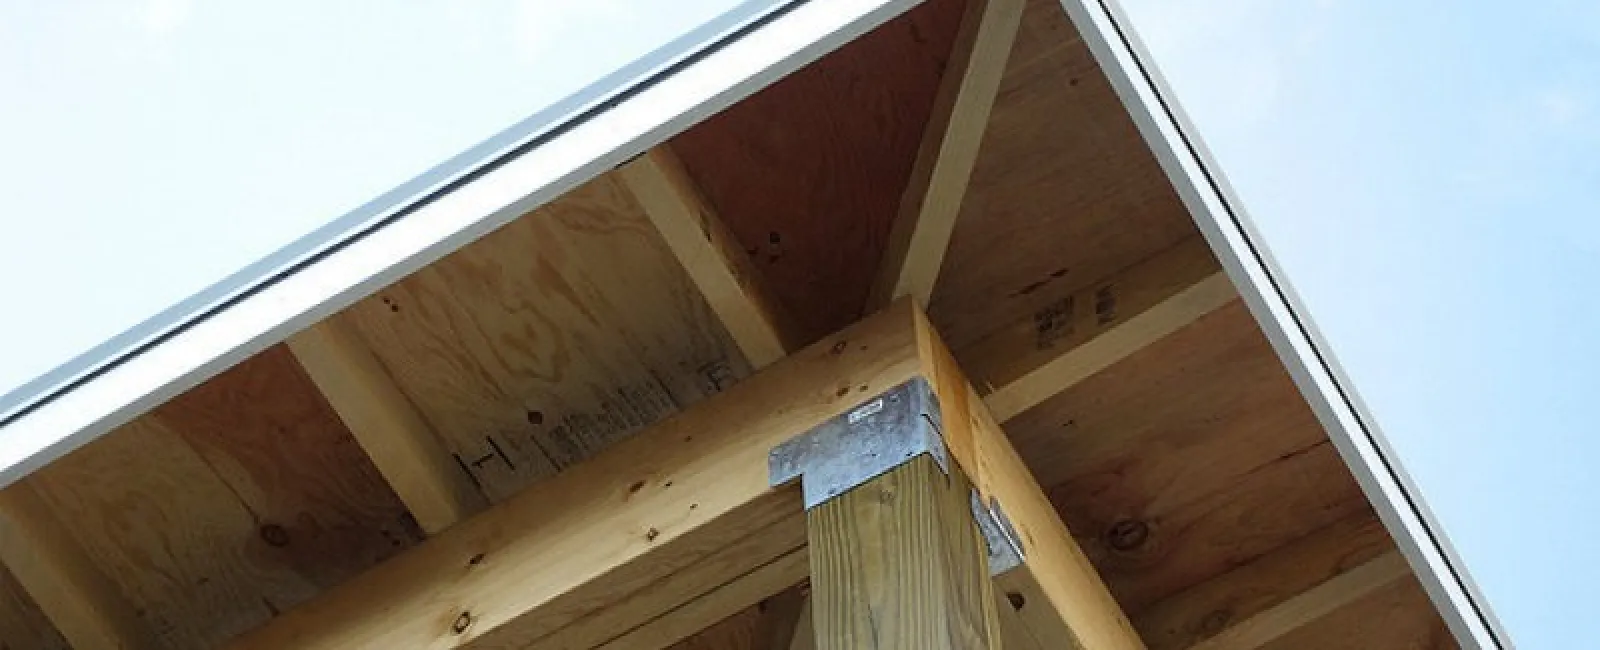 Drip edge: facts, benefits and installation